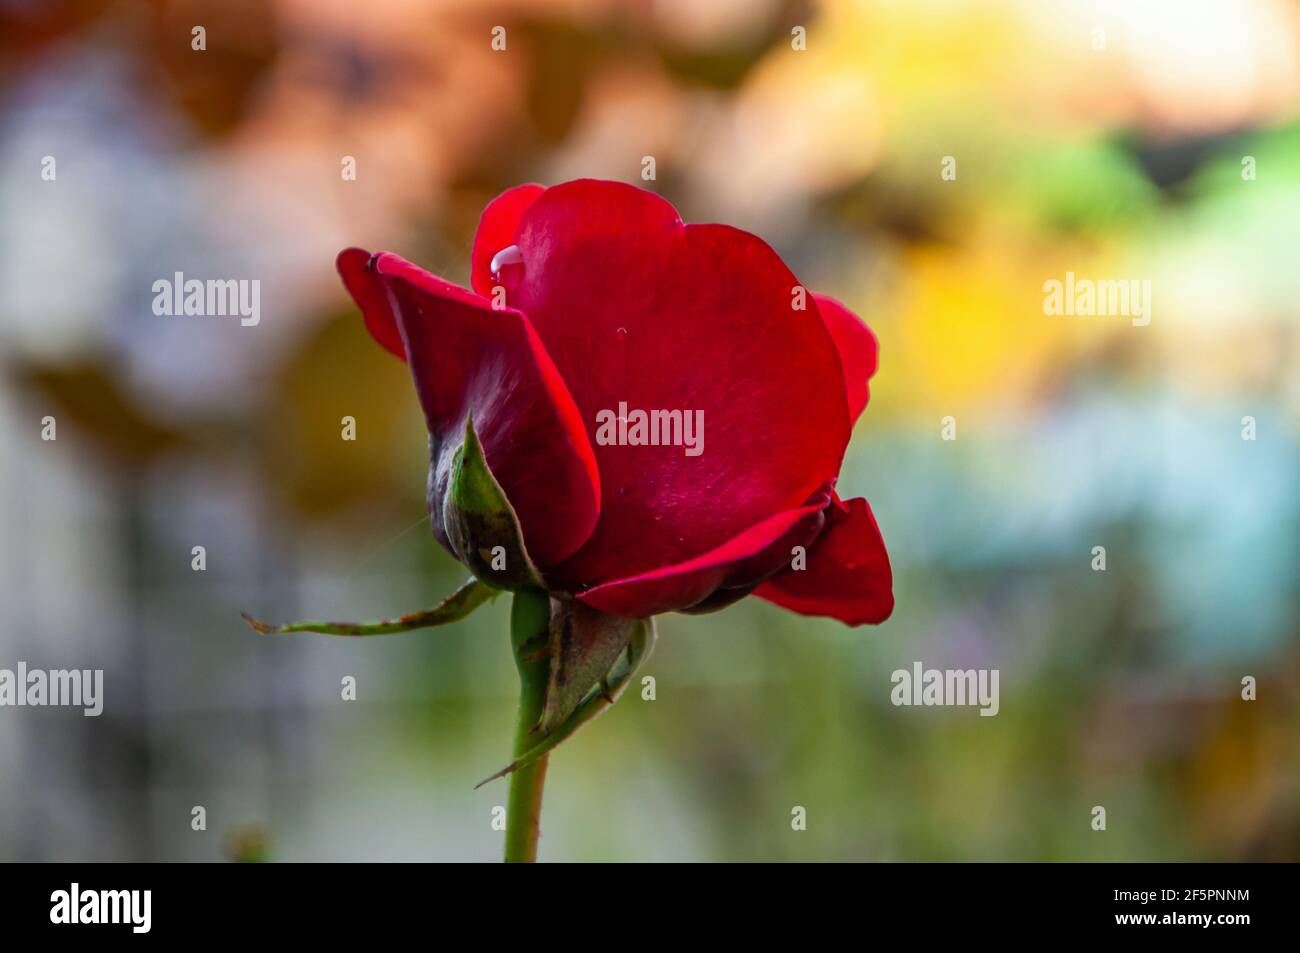 Red flowering rose on blurred colorful garden background. Stock Photo